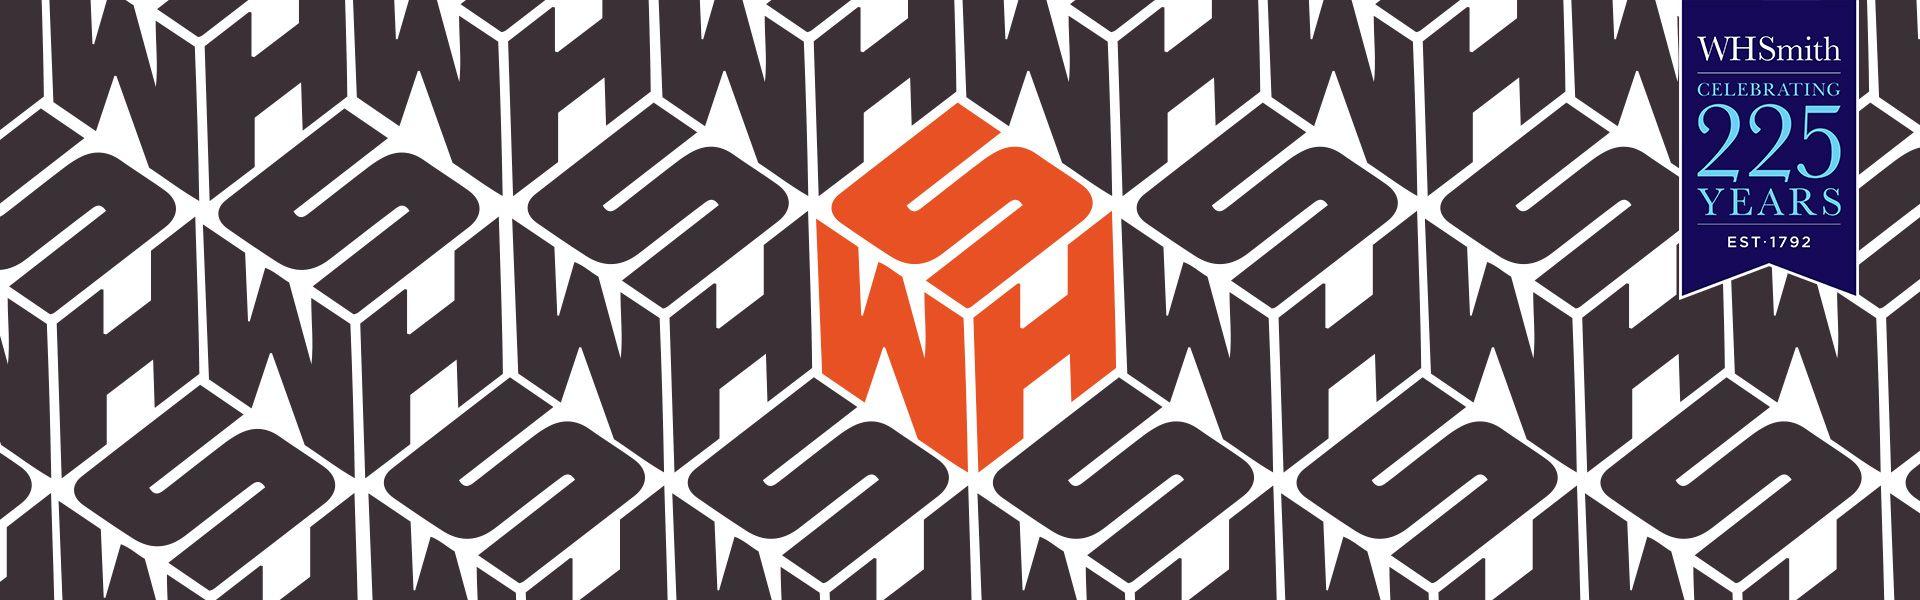 Orange Pattern Logo - A Step Back in Time: The WHSmith Cube Logo